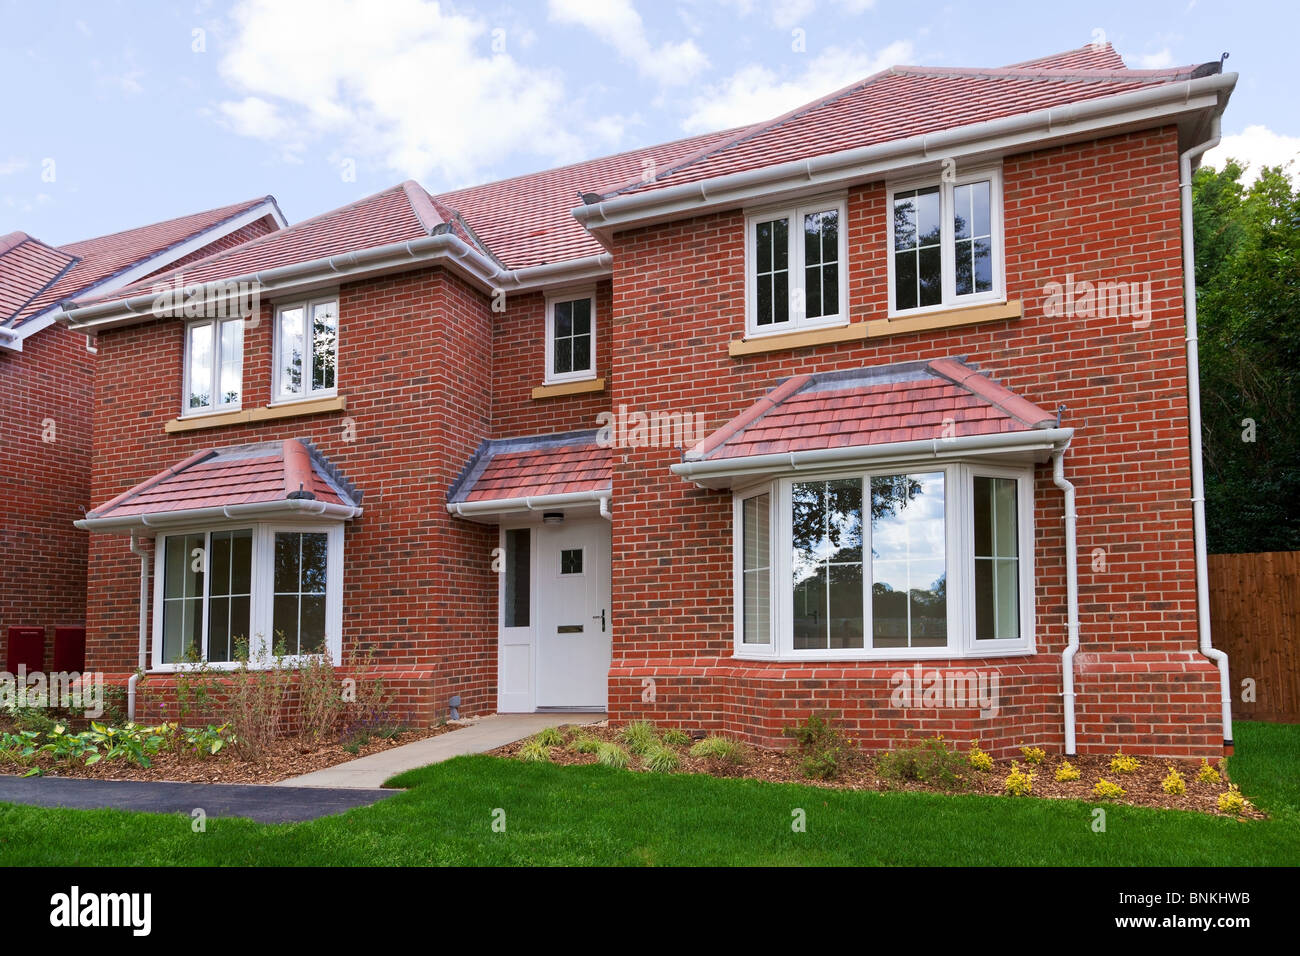 Photo of a brand new unoccupied detached red brick built five bedroom house on a modern housing development. Stock Photo